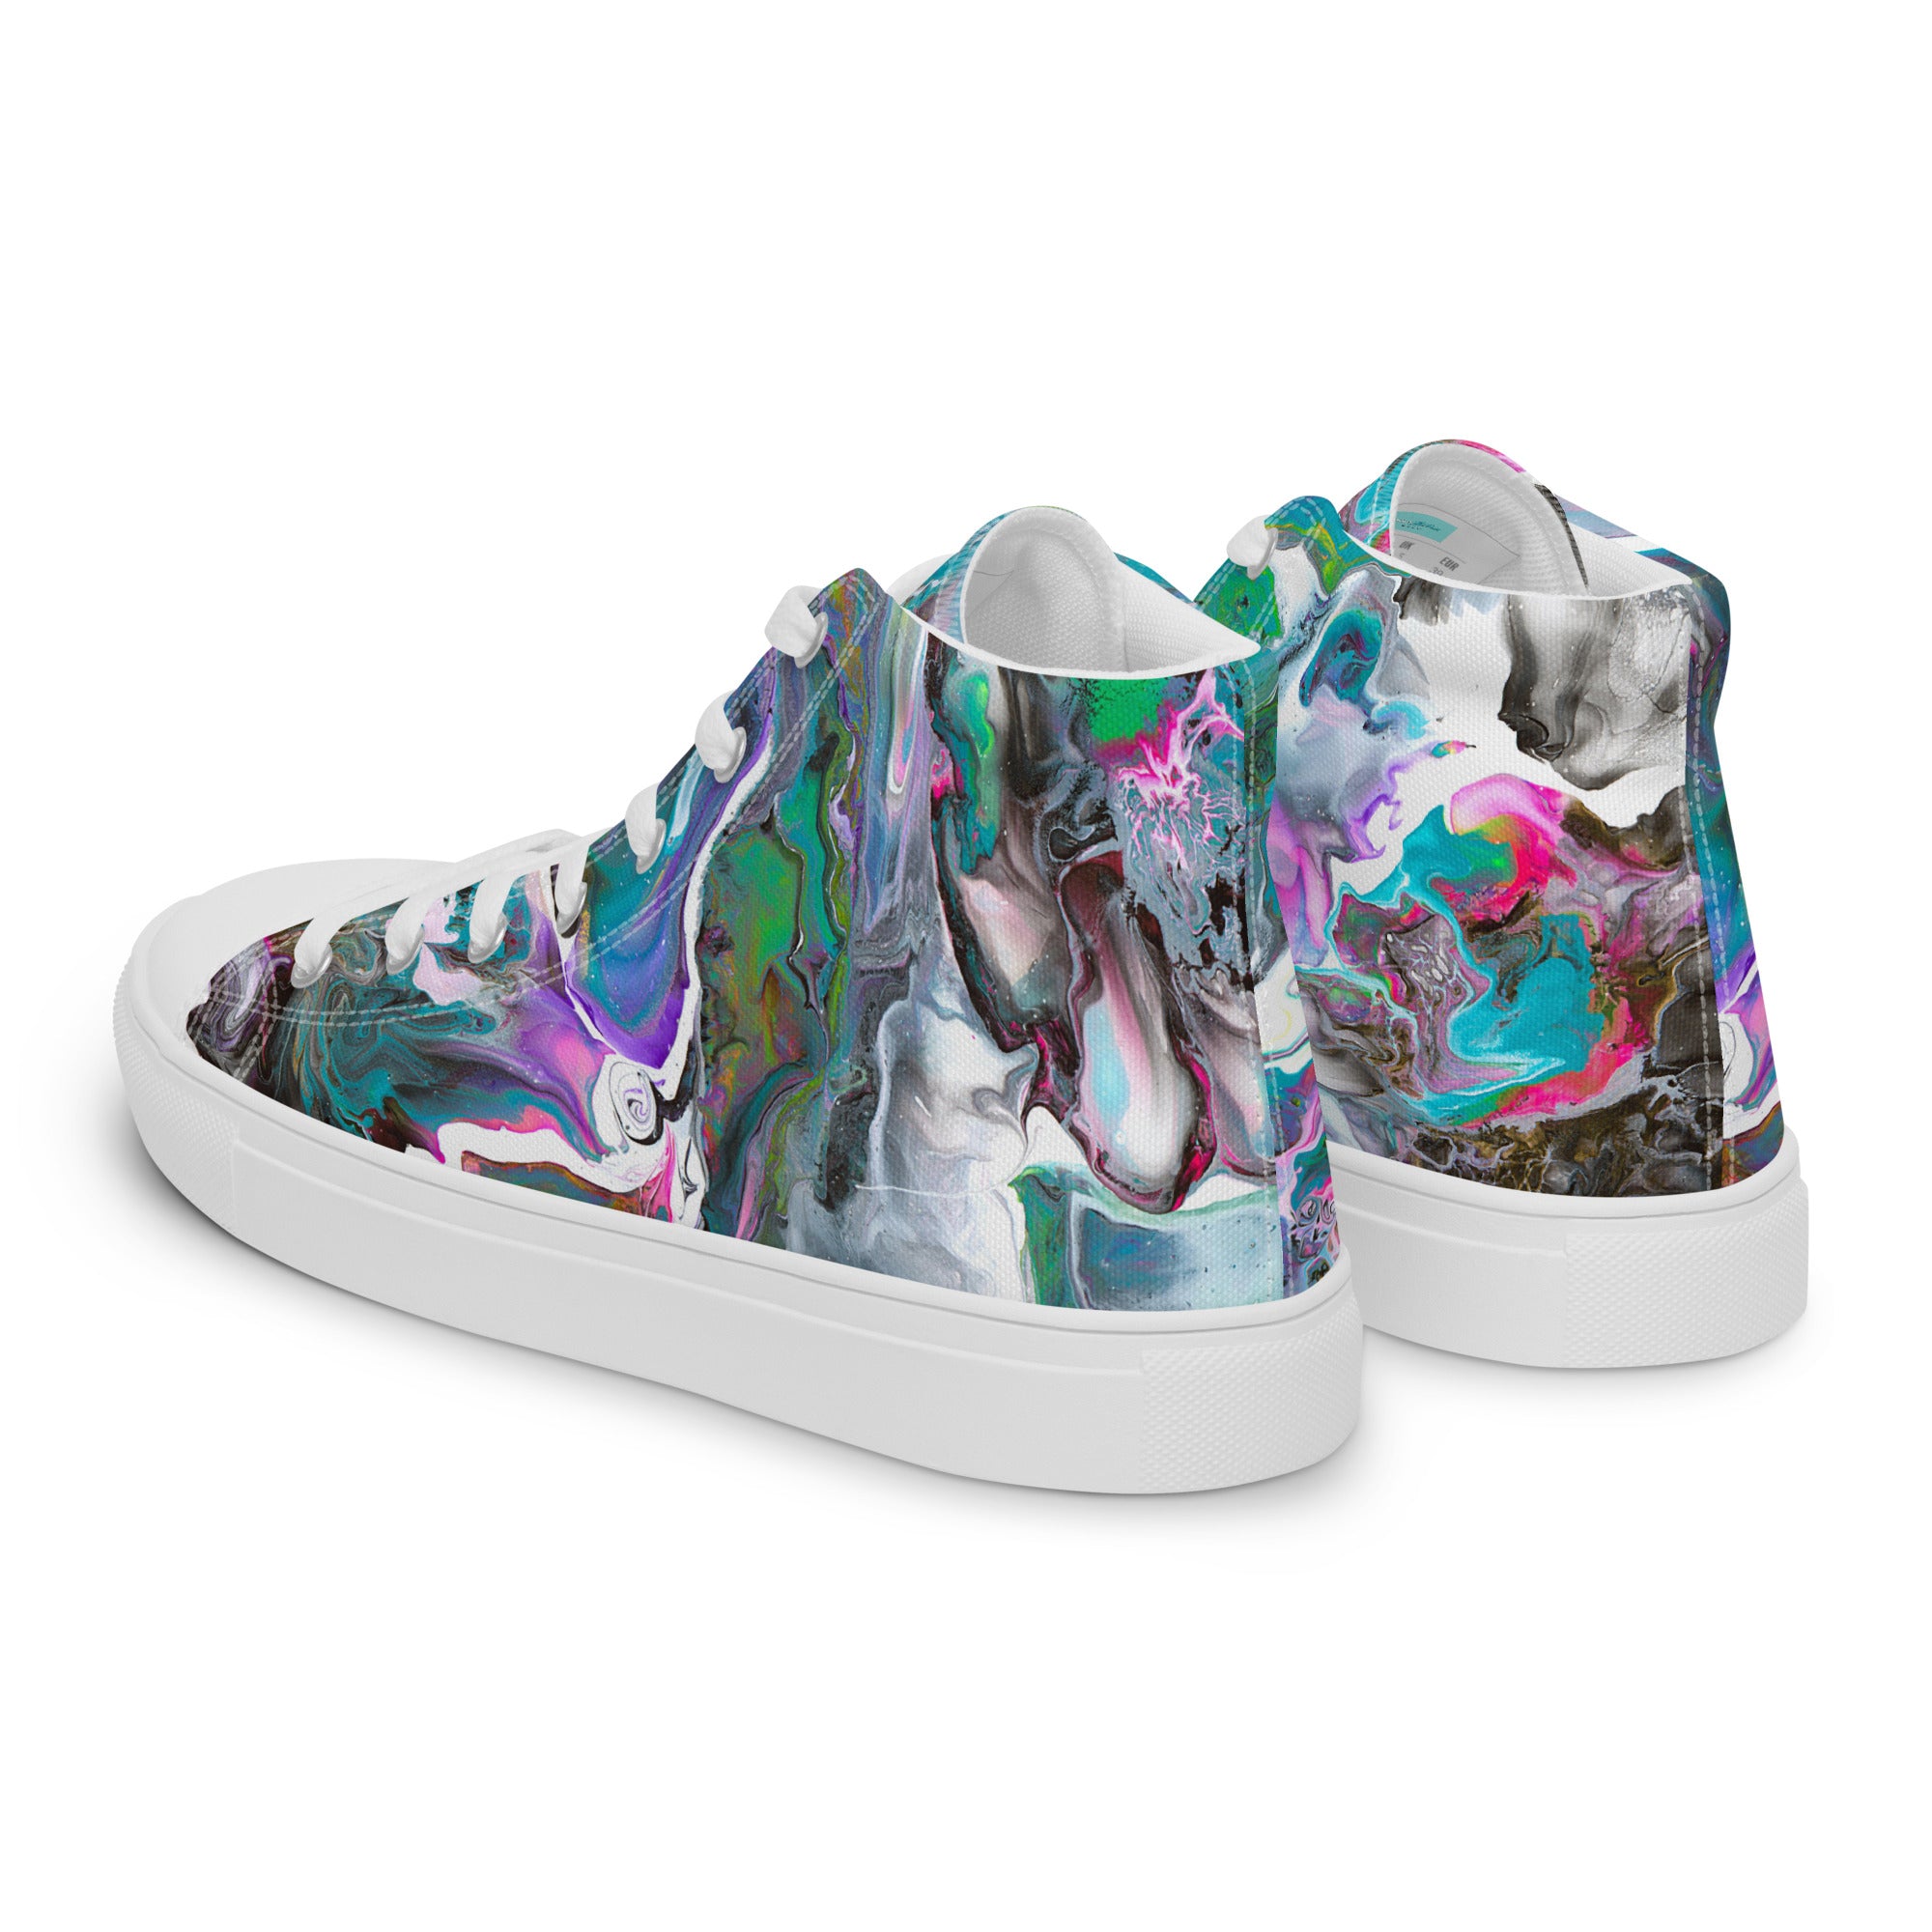 "Northern Lights" Men's High Top Shoes